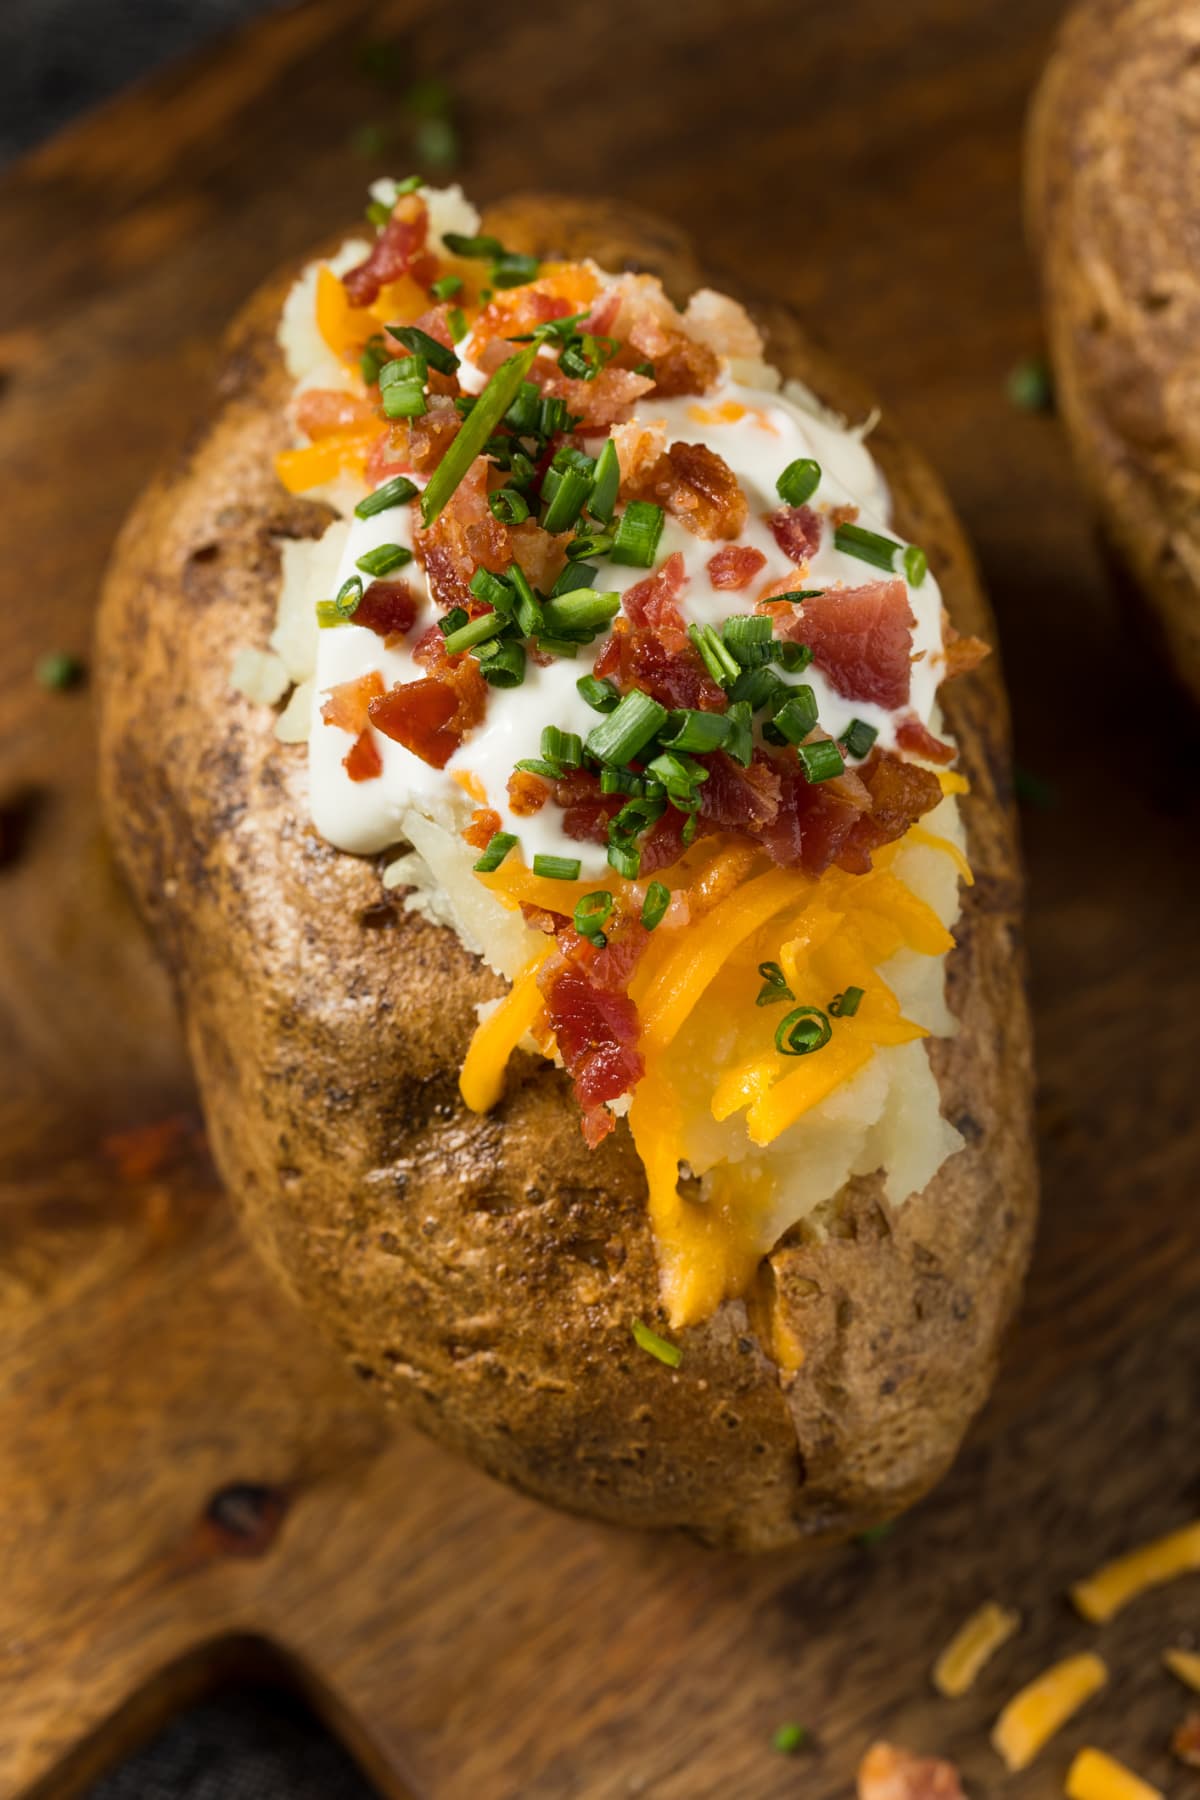 Homemade Loaded Baked Potatoes with Bacon Cheddar and Sour Cream